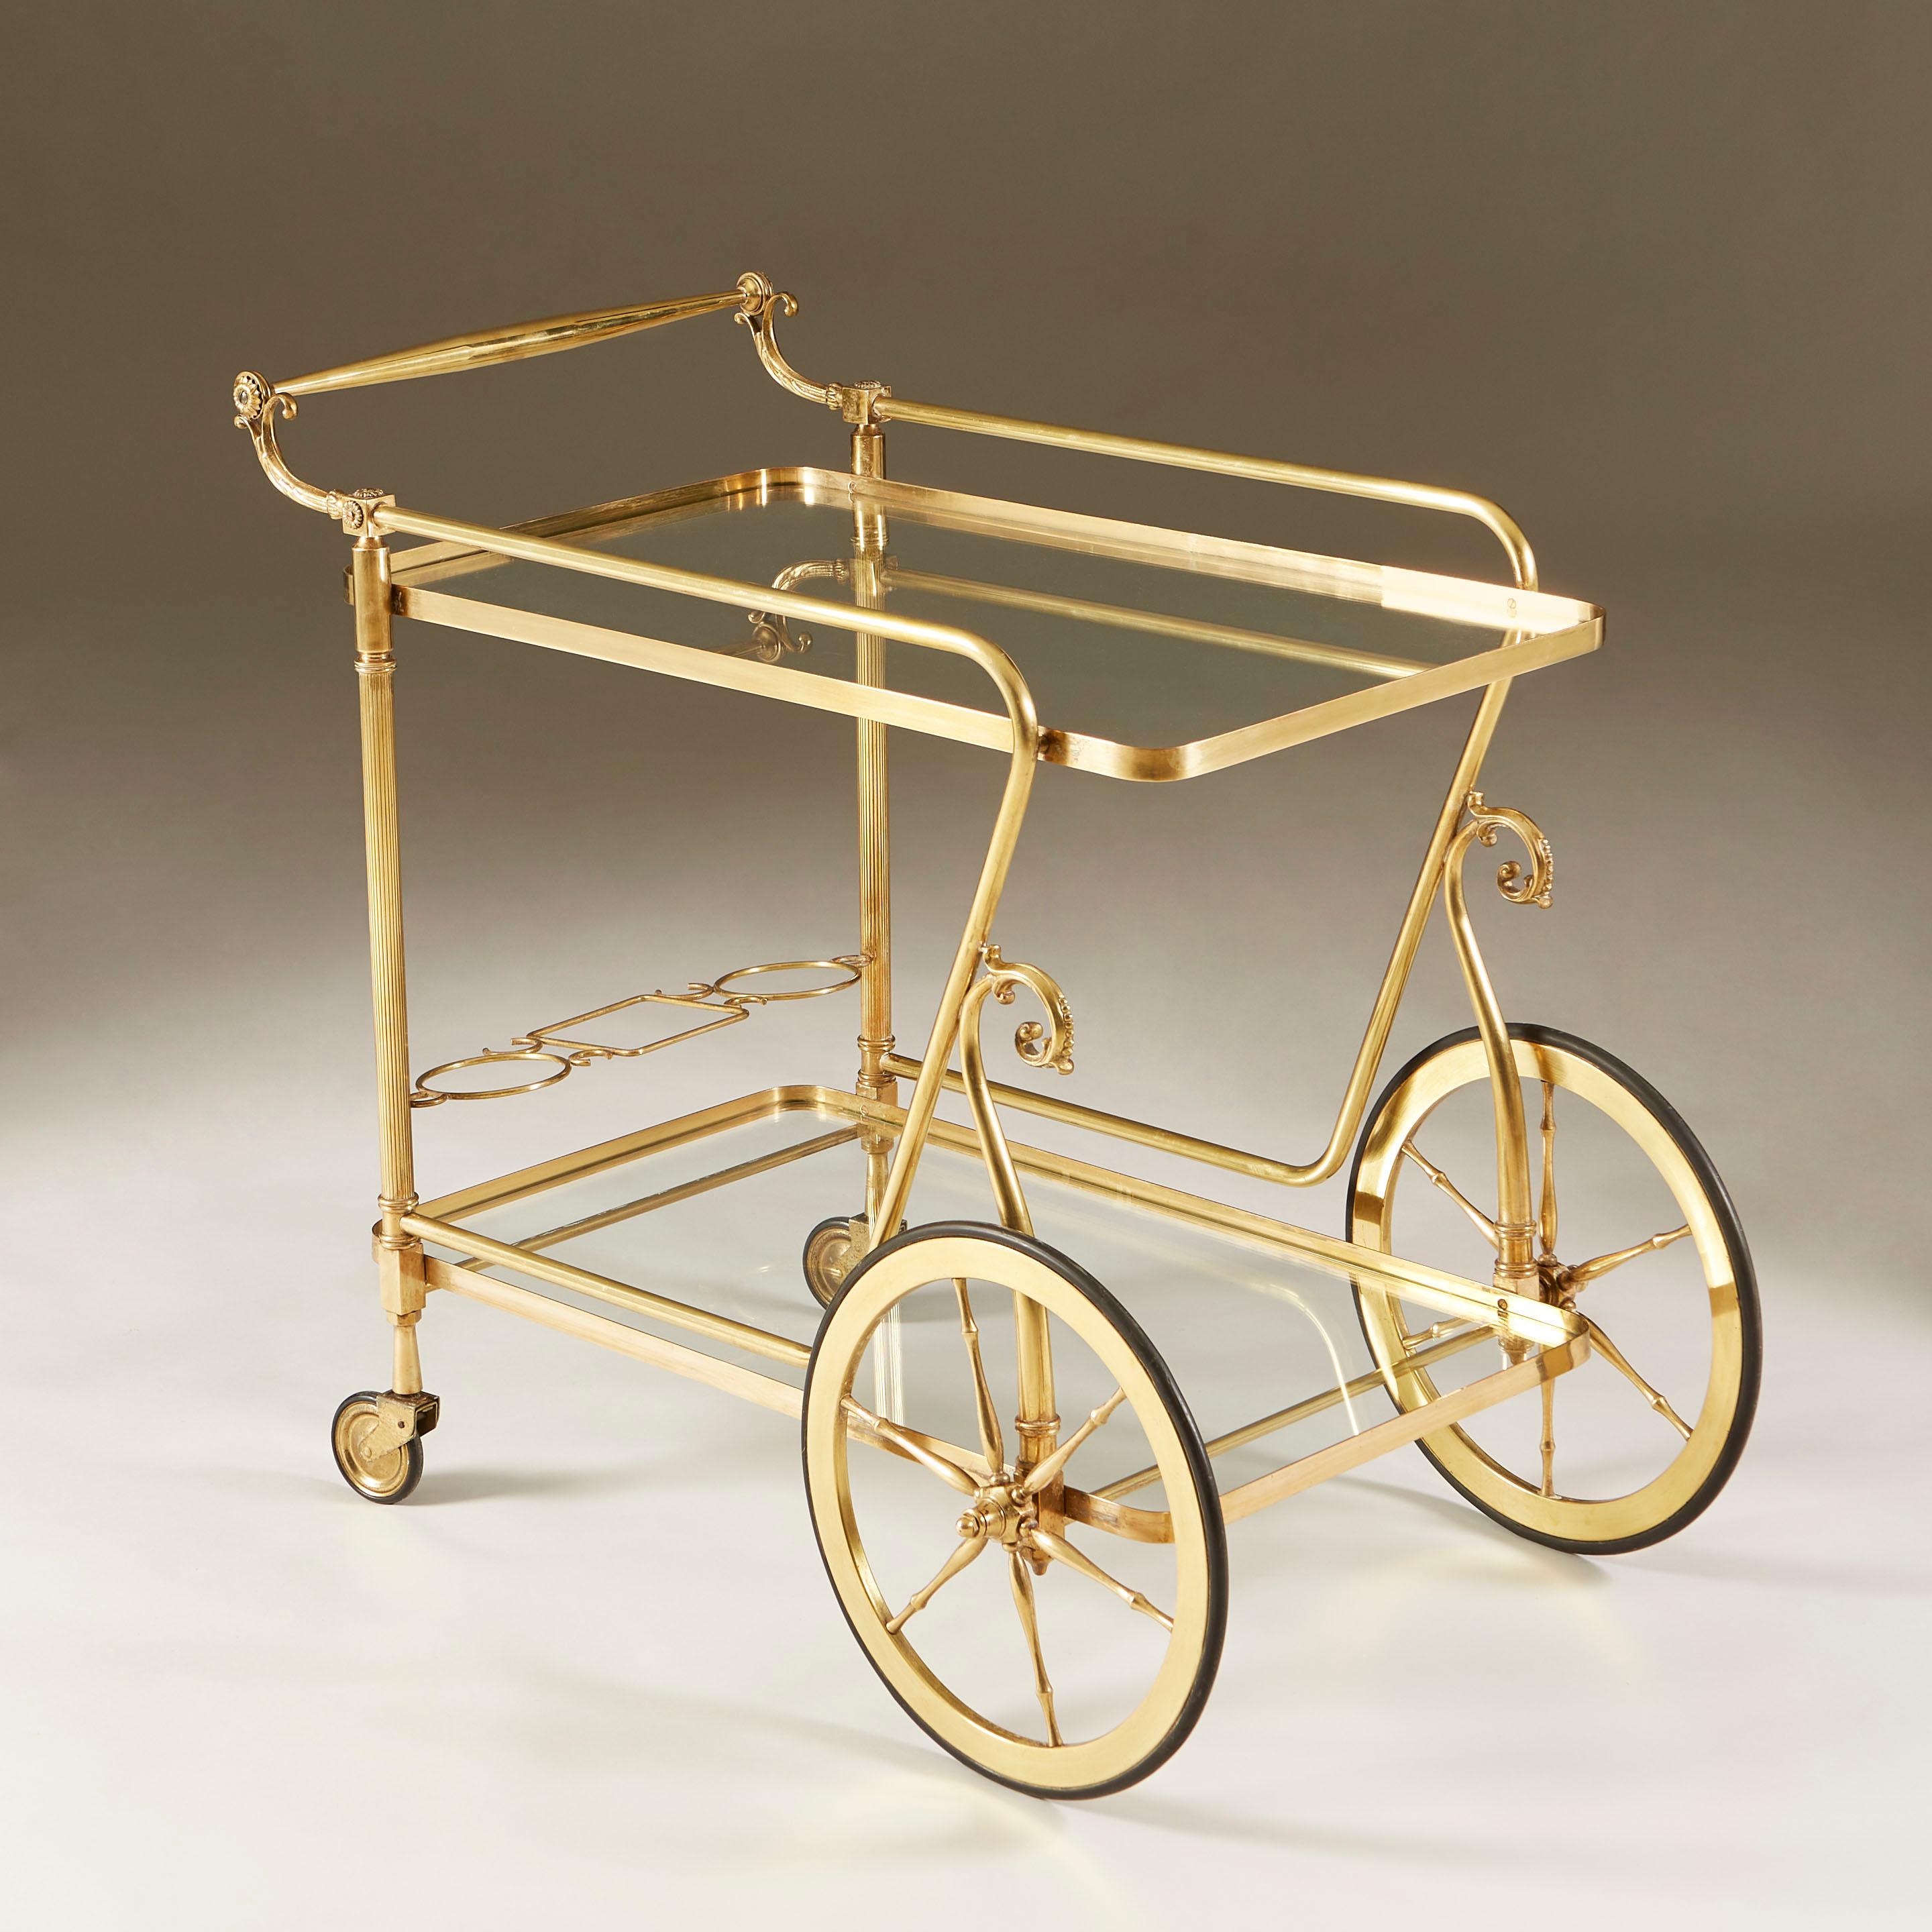 Classic Italian decorative brass drinks trolley with oversized front wheels, two glass shelves and brass holders to store three bottles. Excellent condition.